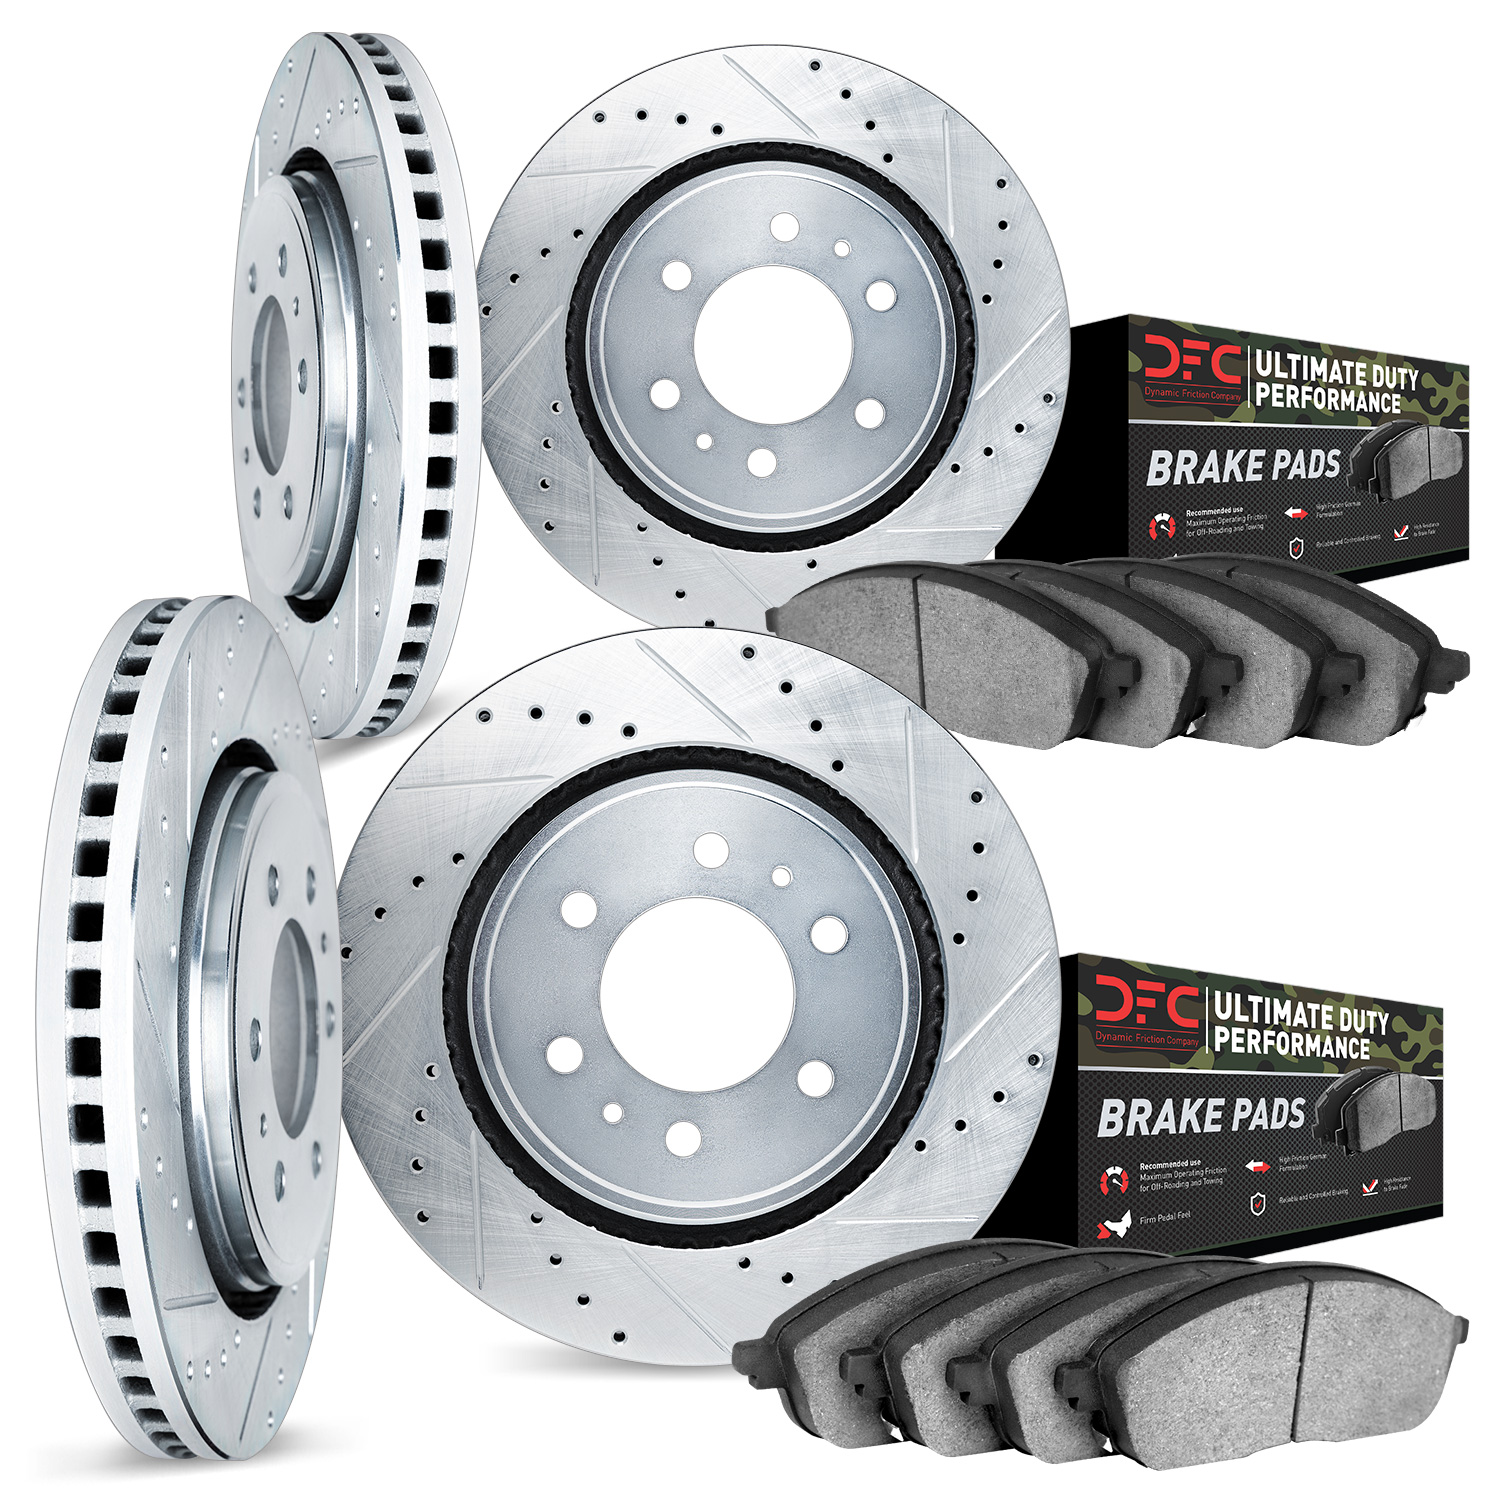 7404-54035 Drilled/Slotted Brake Rotors with Ultimate-Duty Brake Pads Kit [Silver], 2009-2009 Ford/Lincoln/Mercury/Mazda, Positi